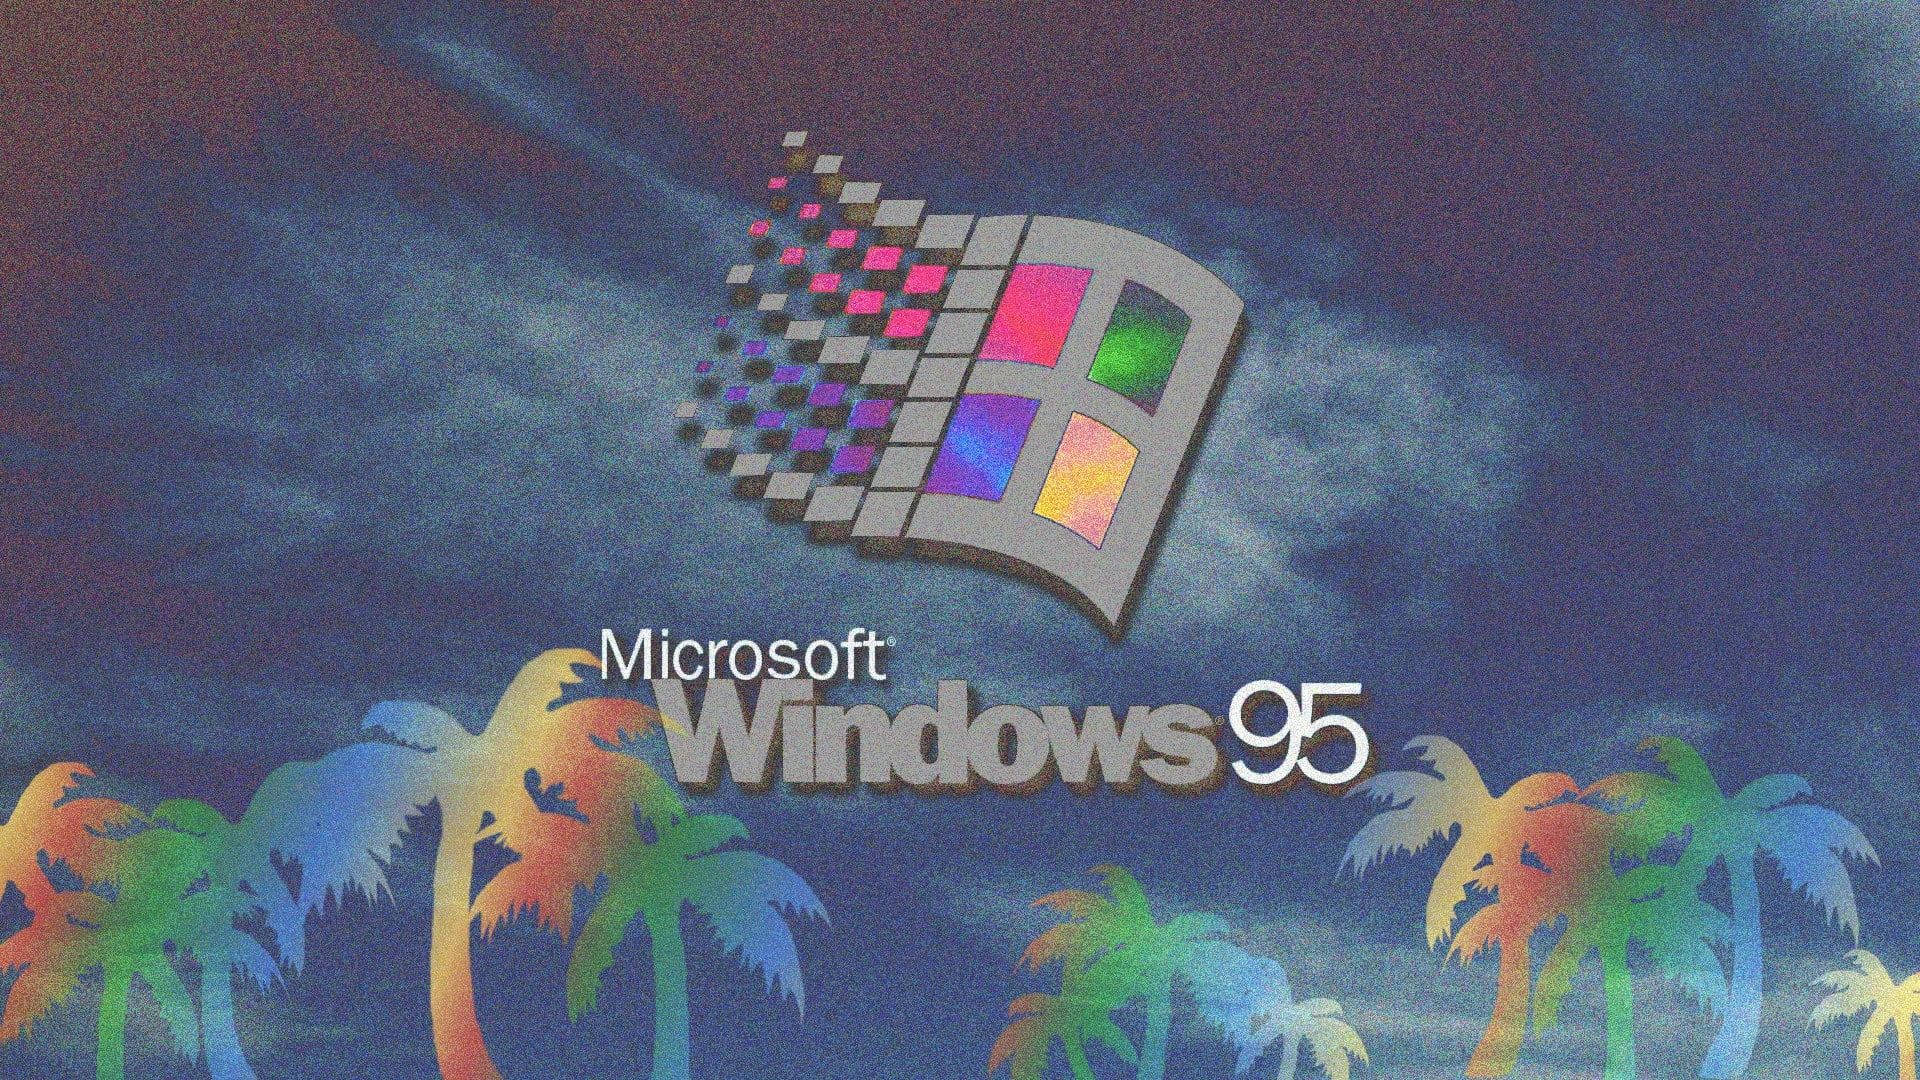 Feel the nostalgia of the 90's and take a trip back in time with this Vaporwave/Windows 95 image. Wallpaper